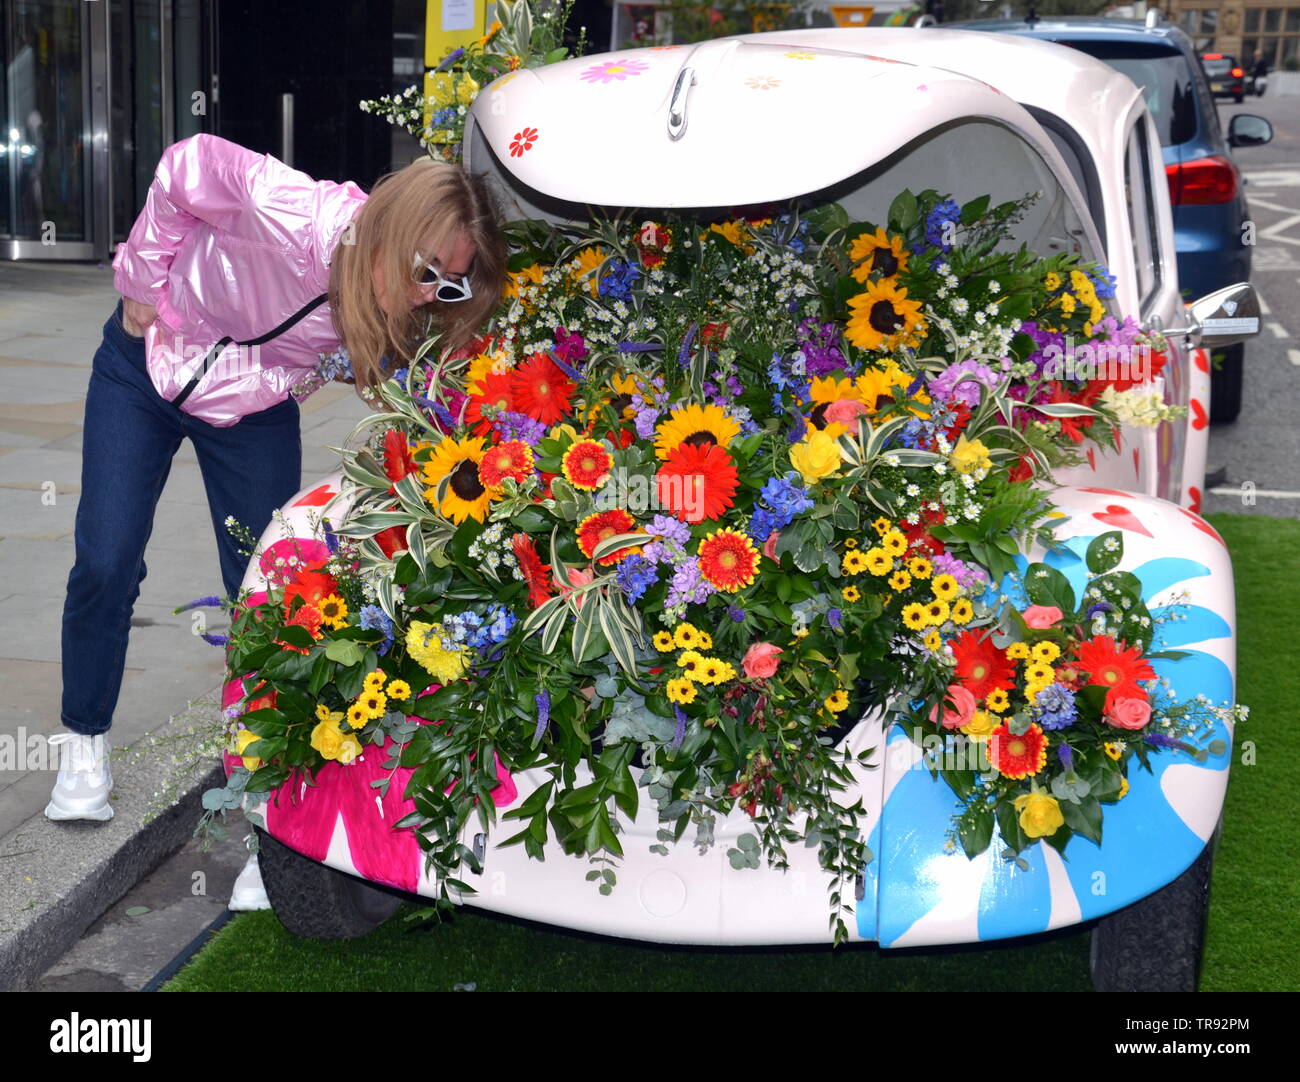 The Manchester Flower Show, part of Manchester's King Street  Festival on June 1st - 2nd, 2019, prepares to open. This year’s theme:Flower Power! Retro objects, like this Volkswagen beetle car, feature in the festival. A female visitor to the city looks at the flowers. Stock Photo